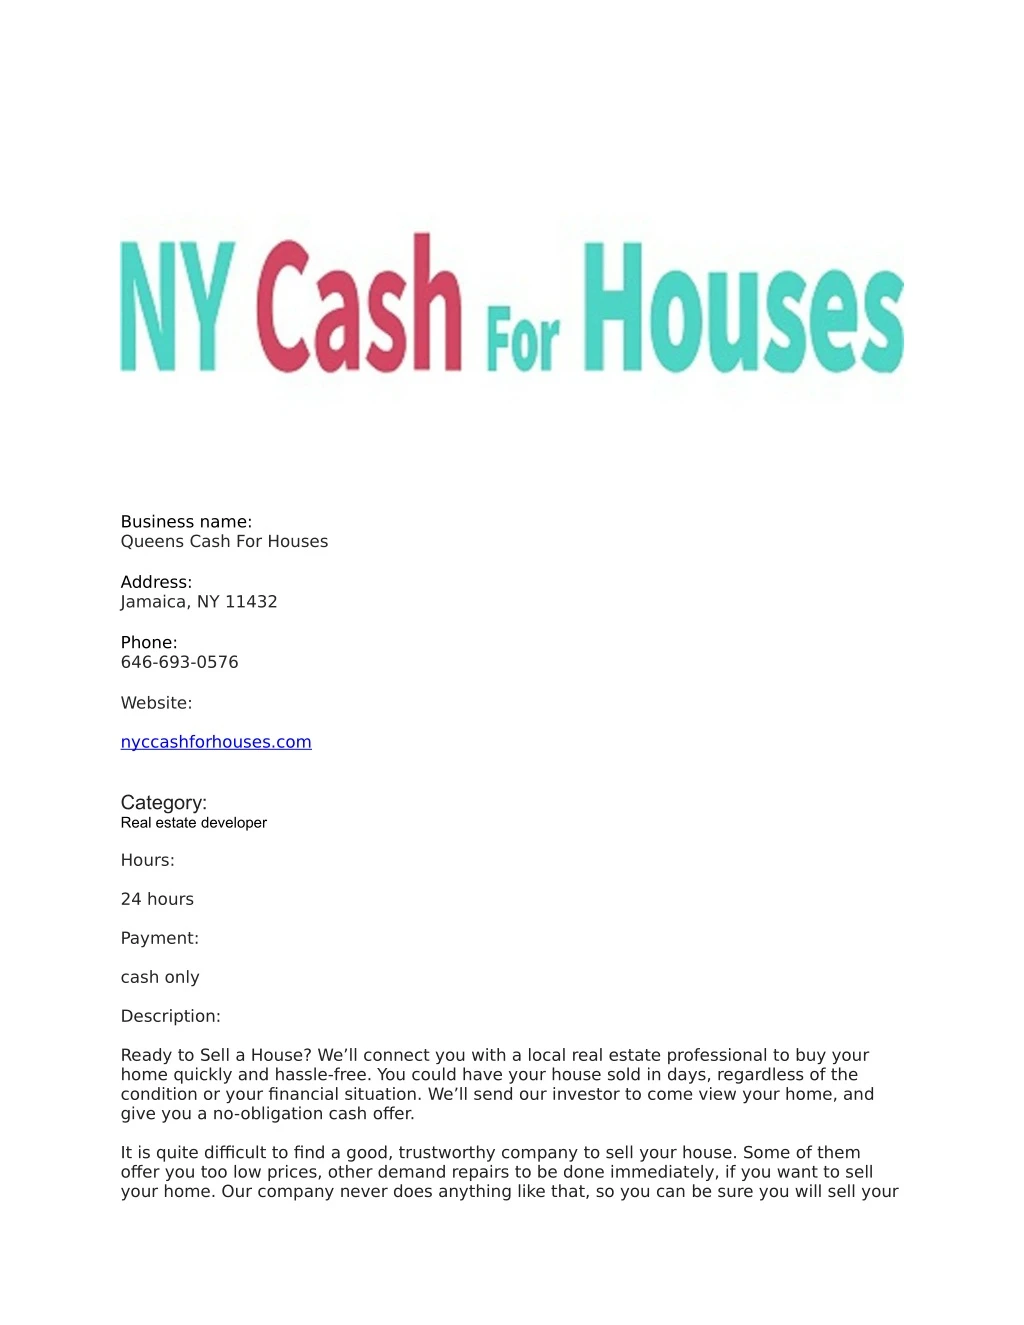 business name queens cash for houses